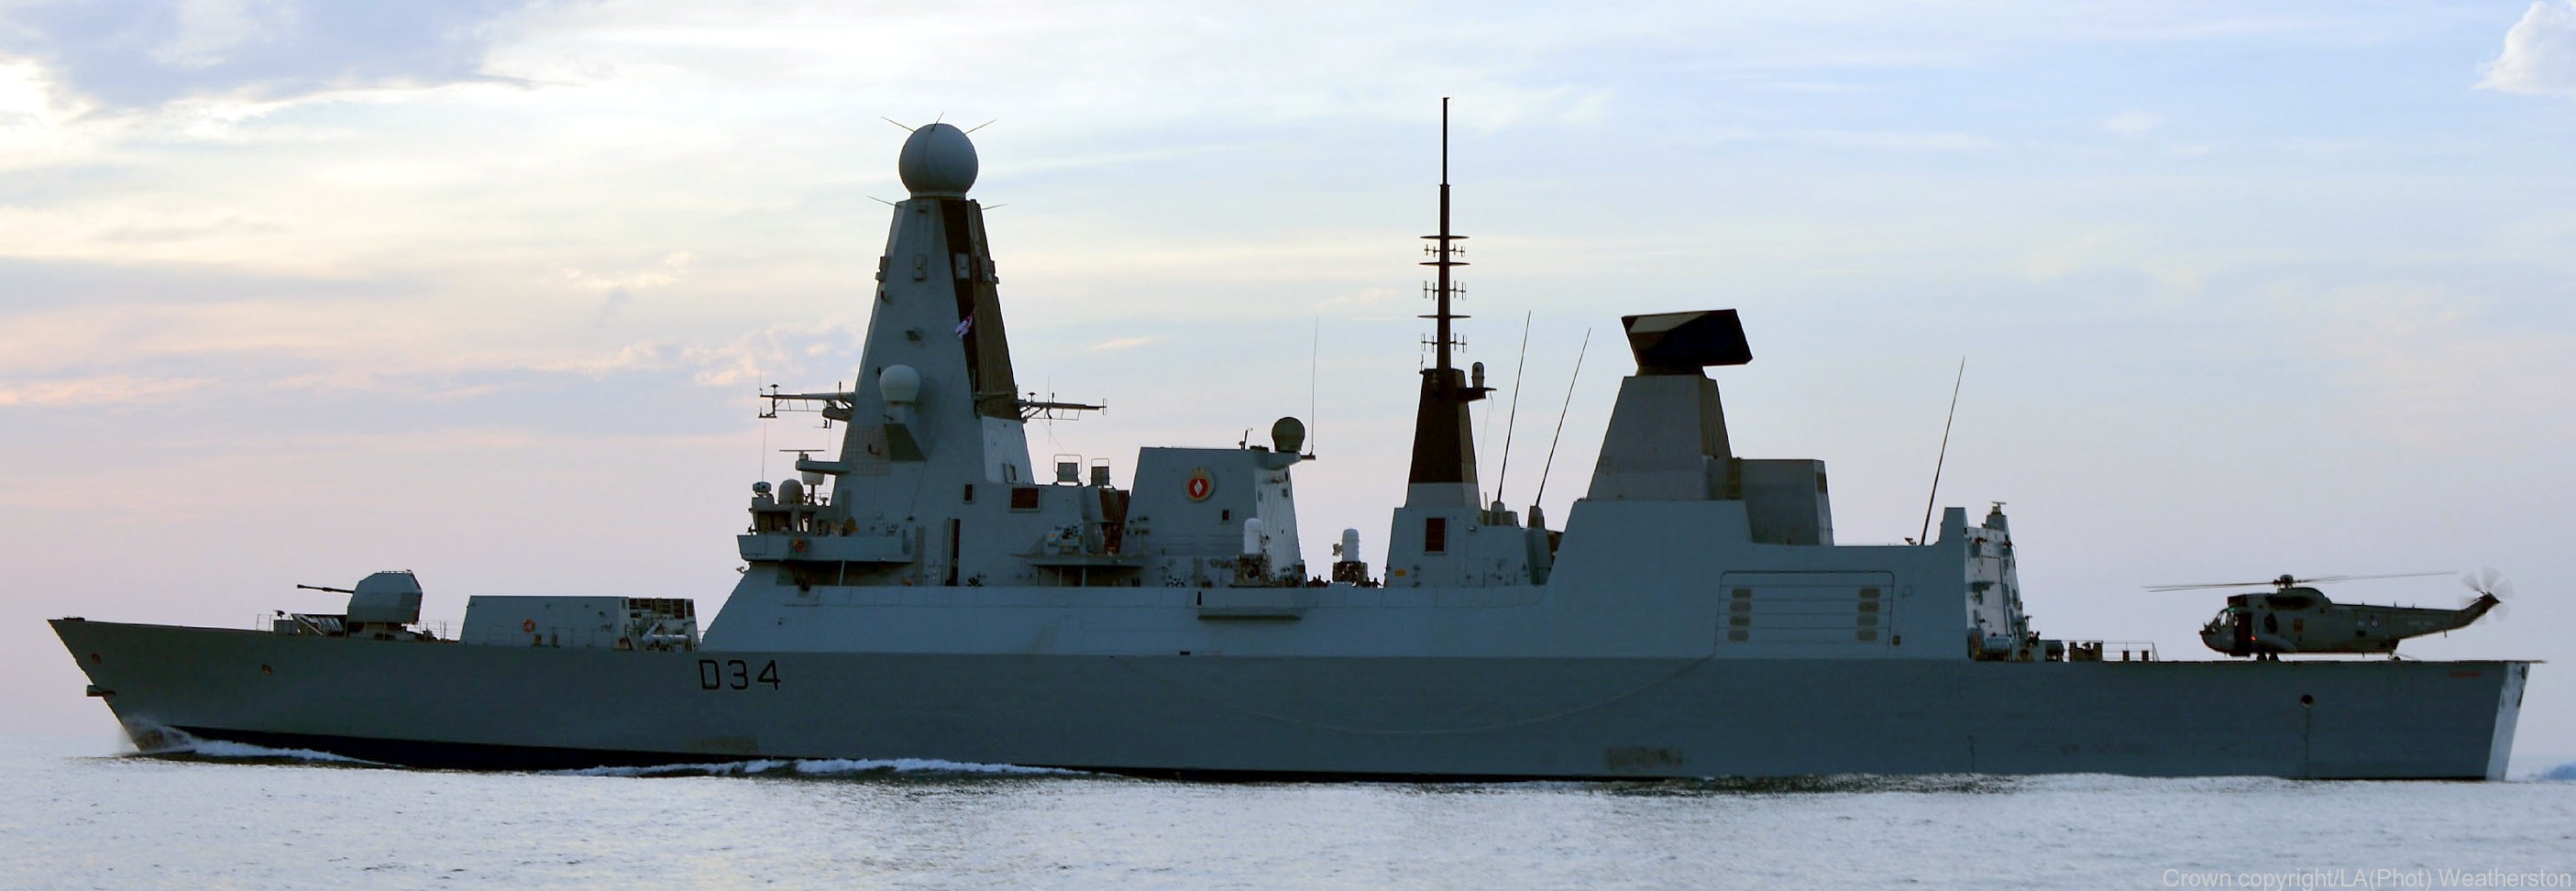 hms diamond d-34 type 45 daring class guided missile destroyer ddg royal navy sea viper paams 13